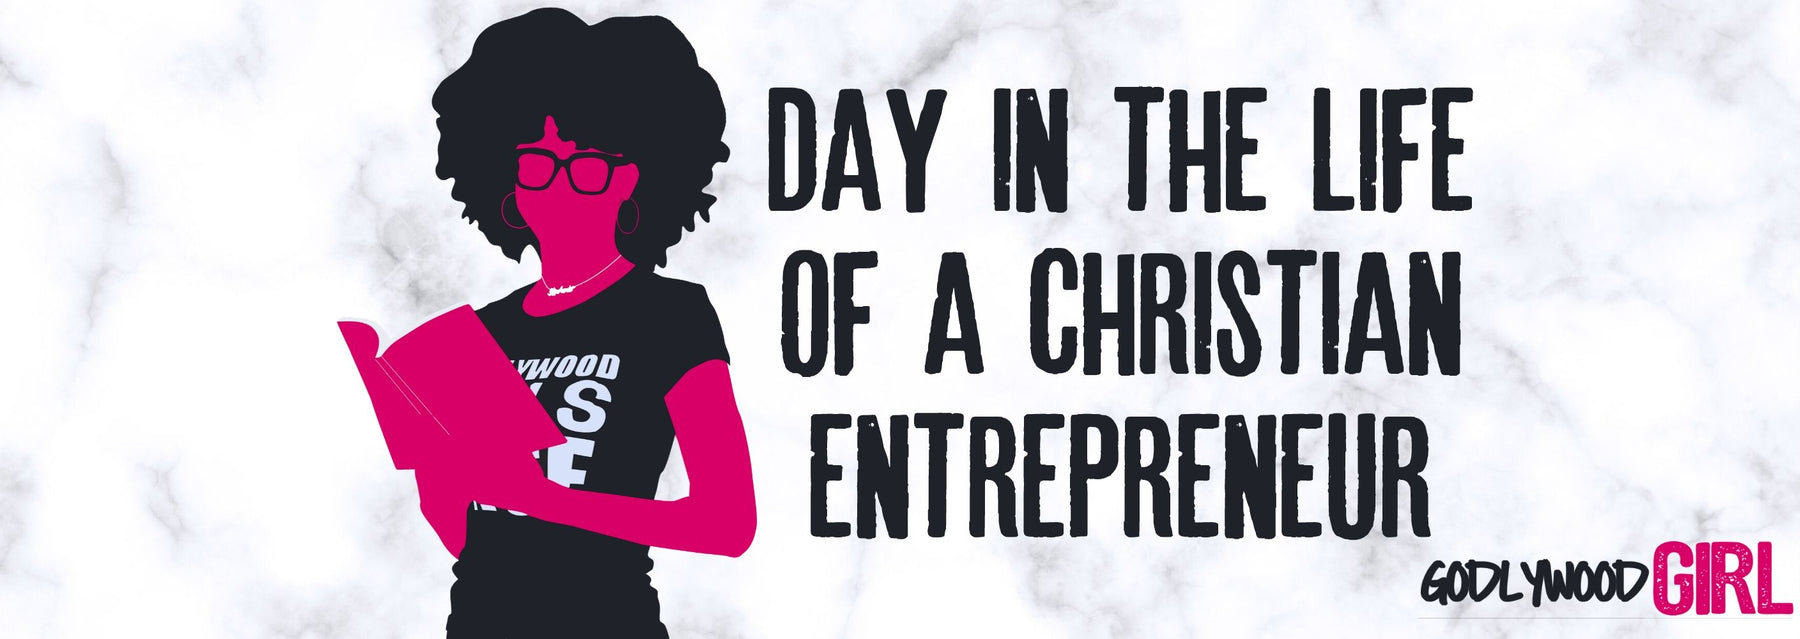 Day In The Life Of A Christian Entrepreneur Ep.81 | School Of Purpose 2.0 Revamp Part 2